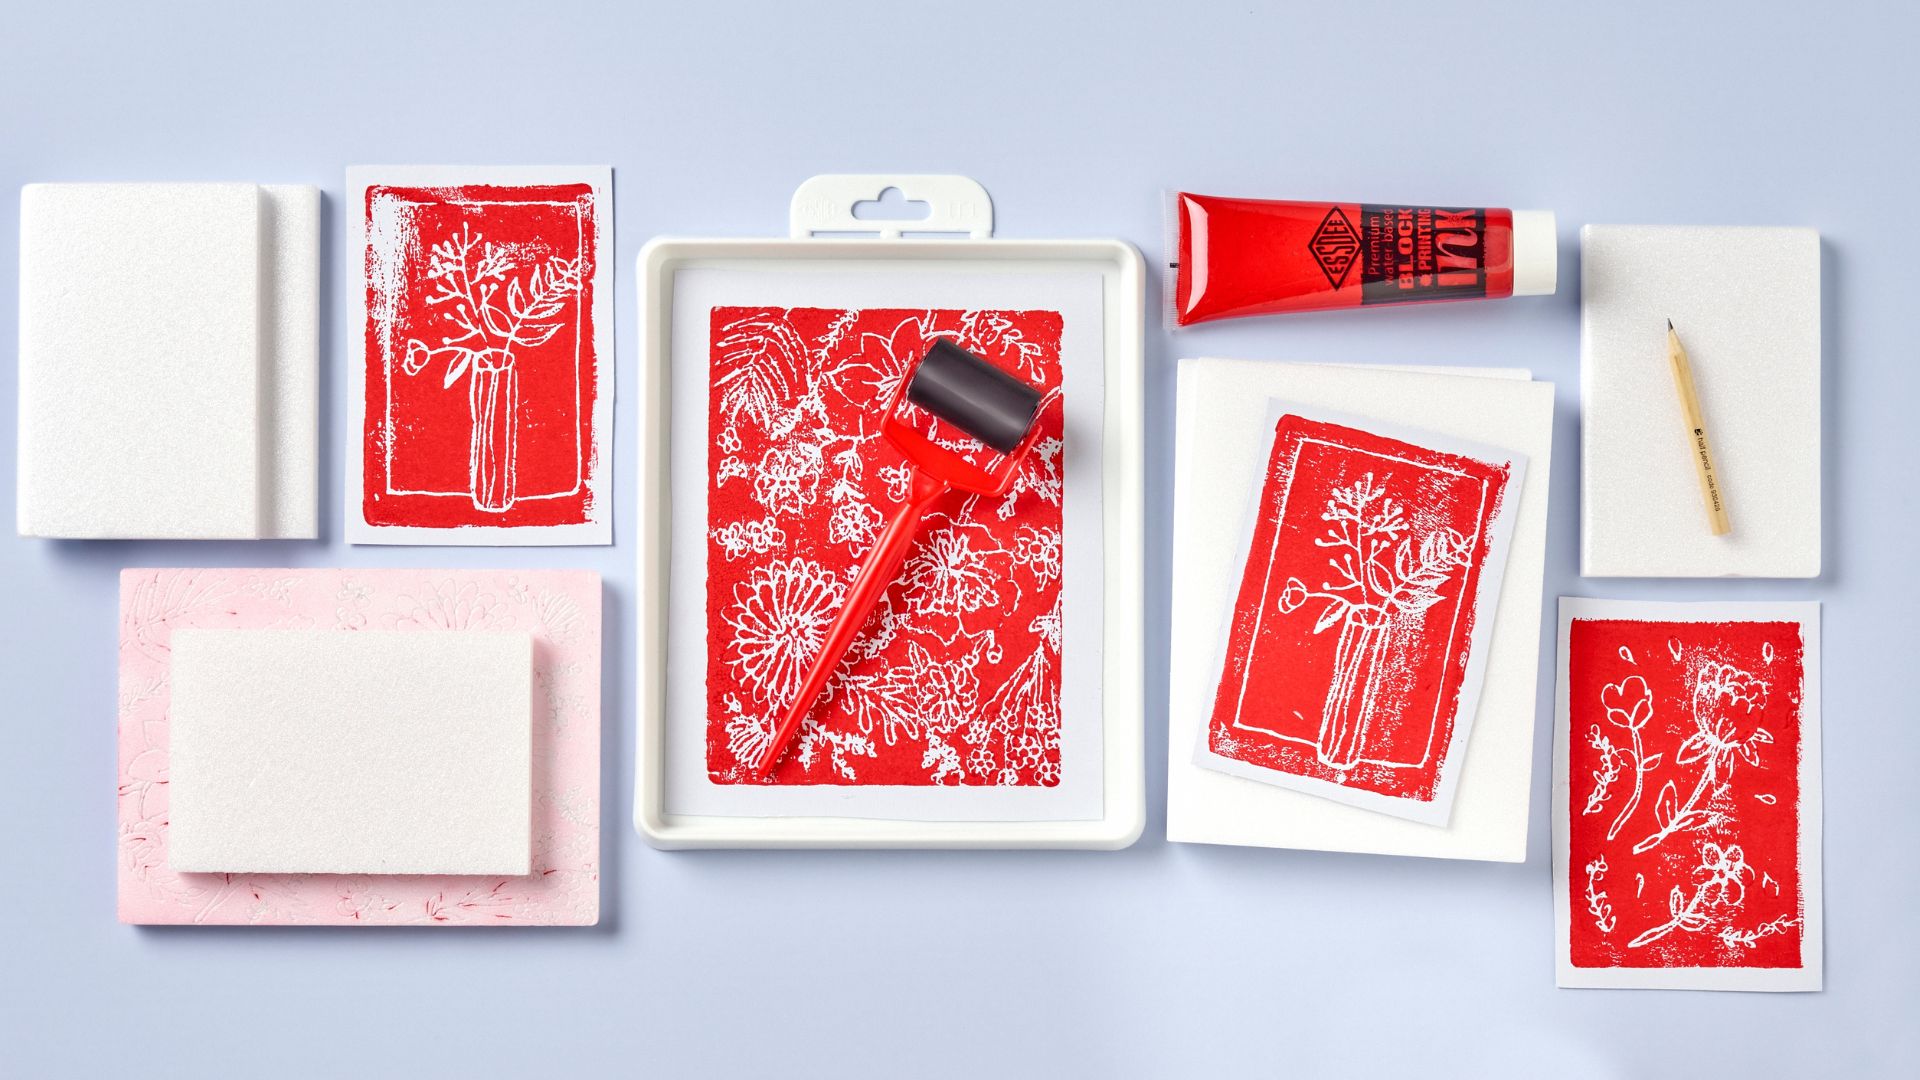 Lino printing station with red Essoee Block Printing Ink & Rubber Roller